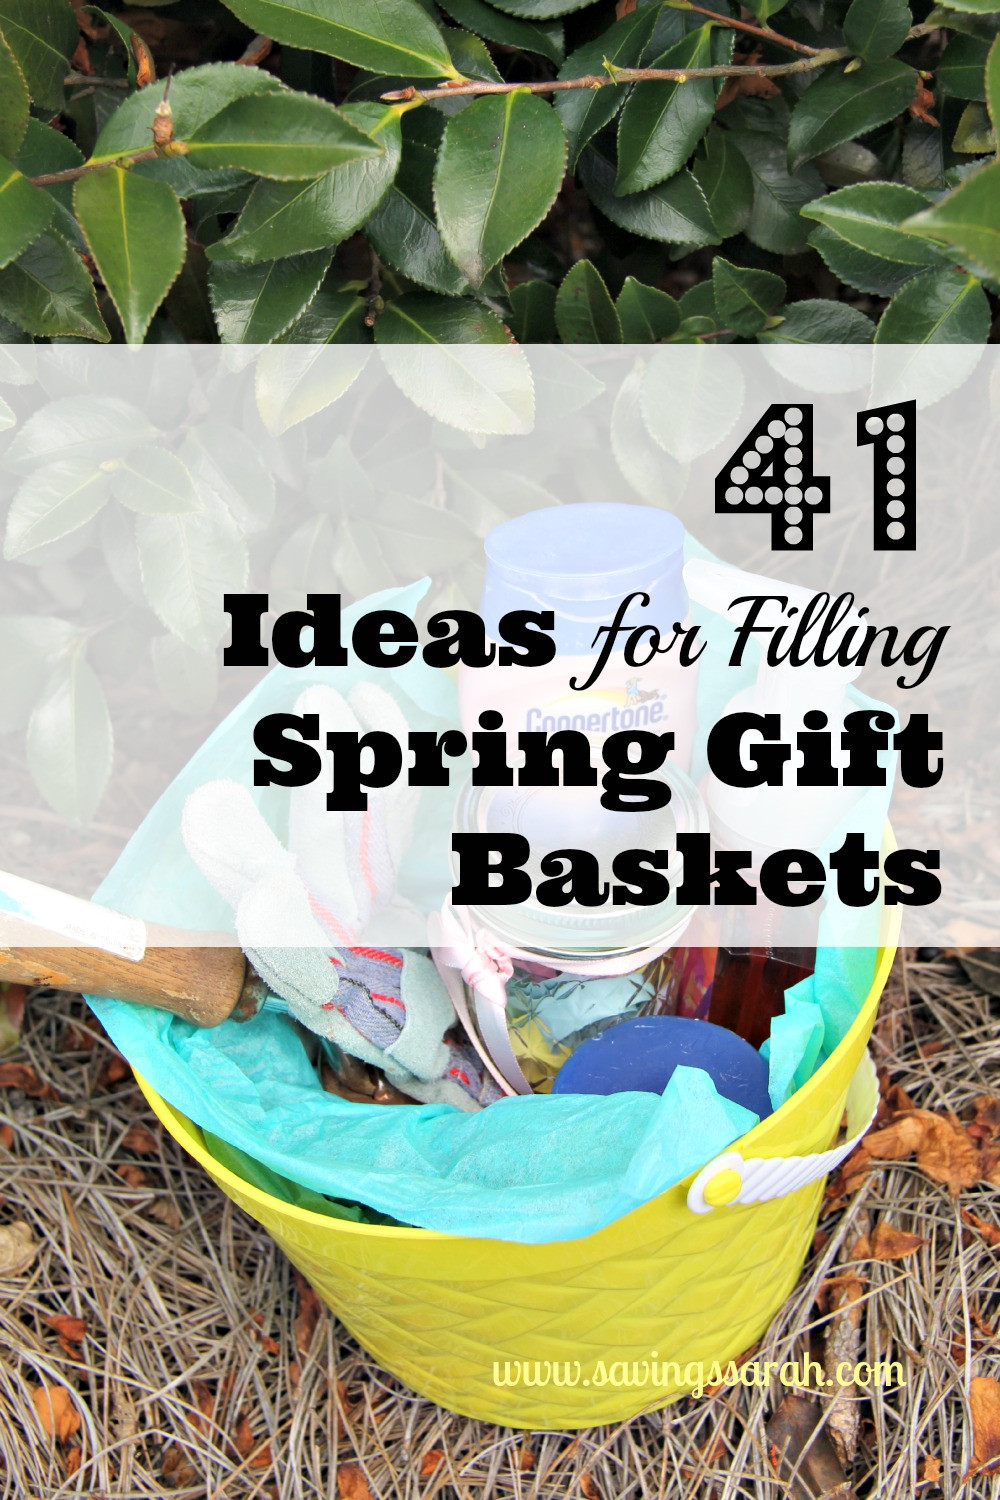 Gift Basket Filler Ideas
 41 Ideas to Fill Spring Gift Baskets Earning and Saving